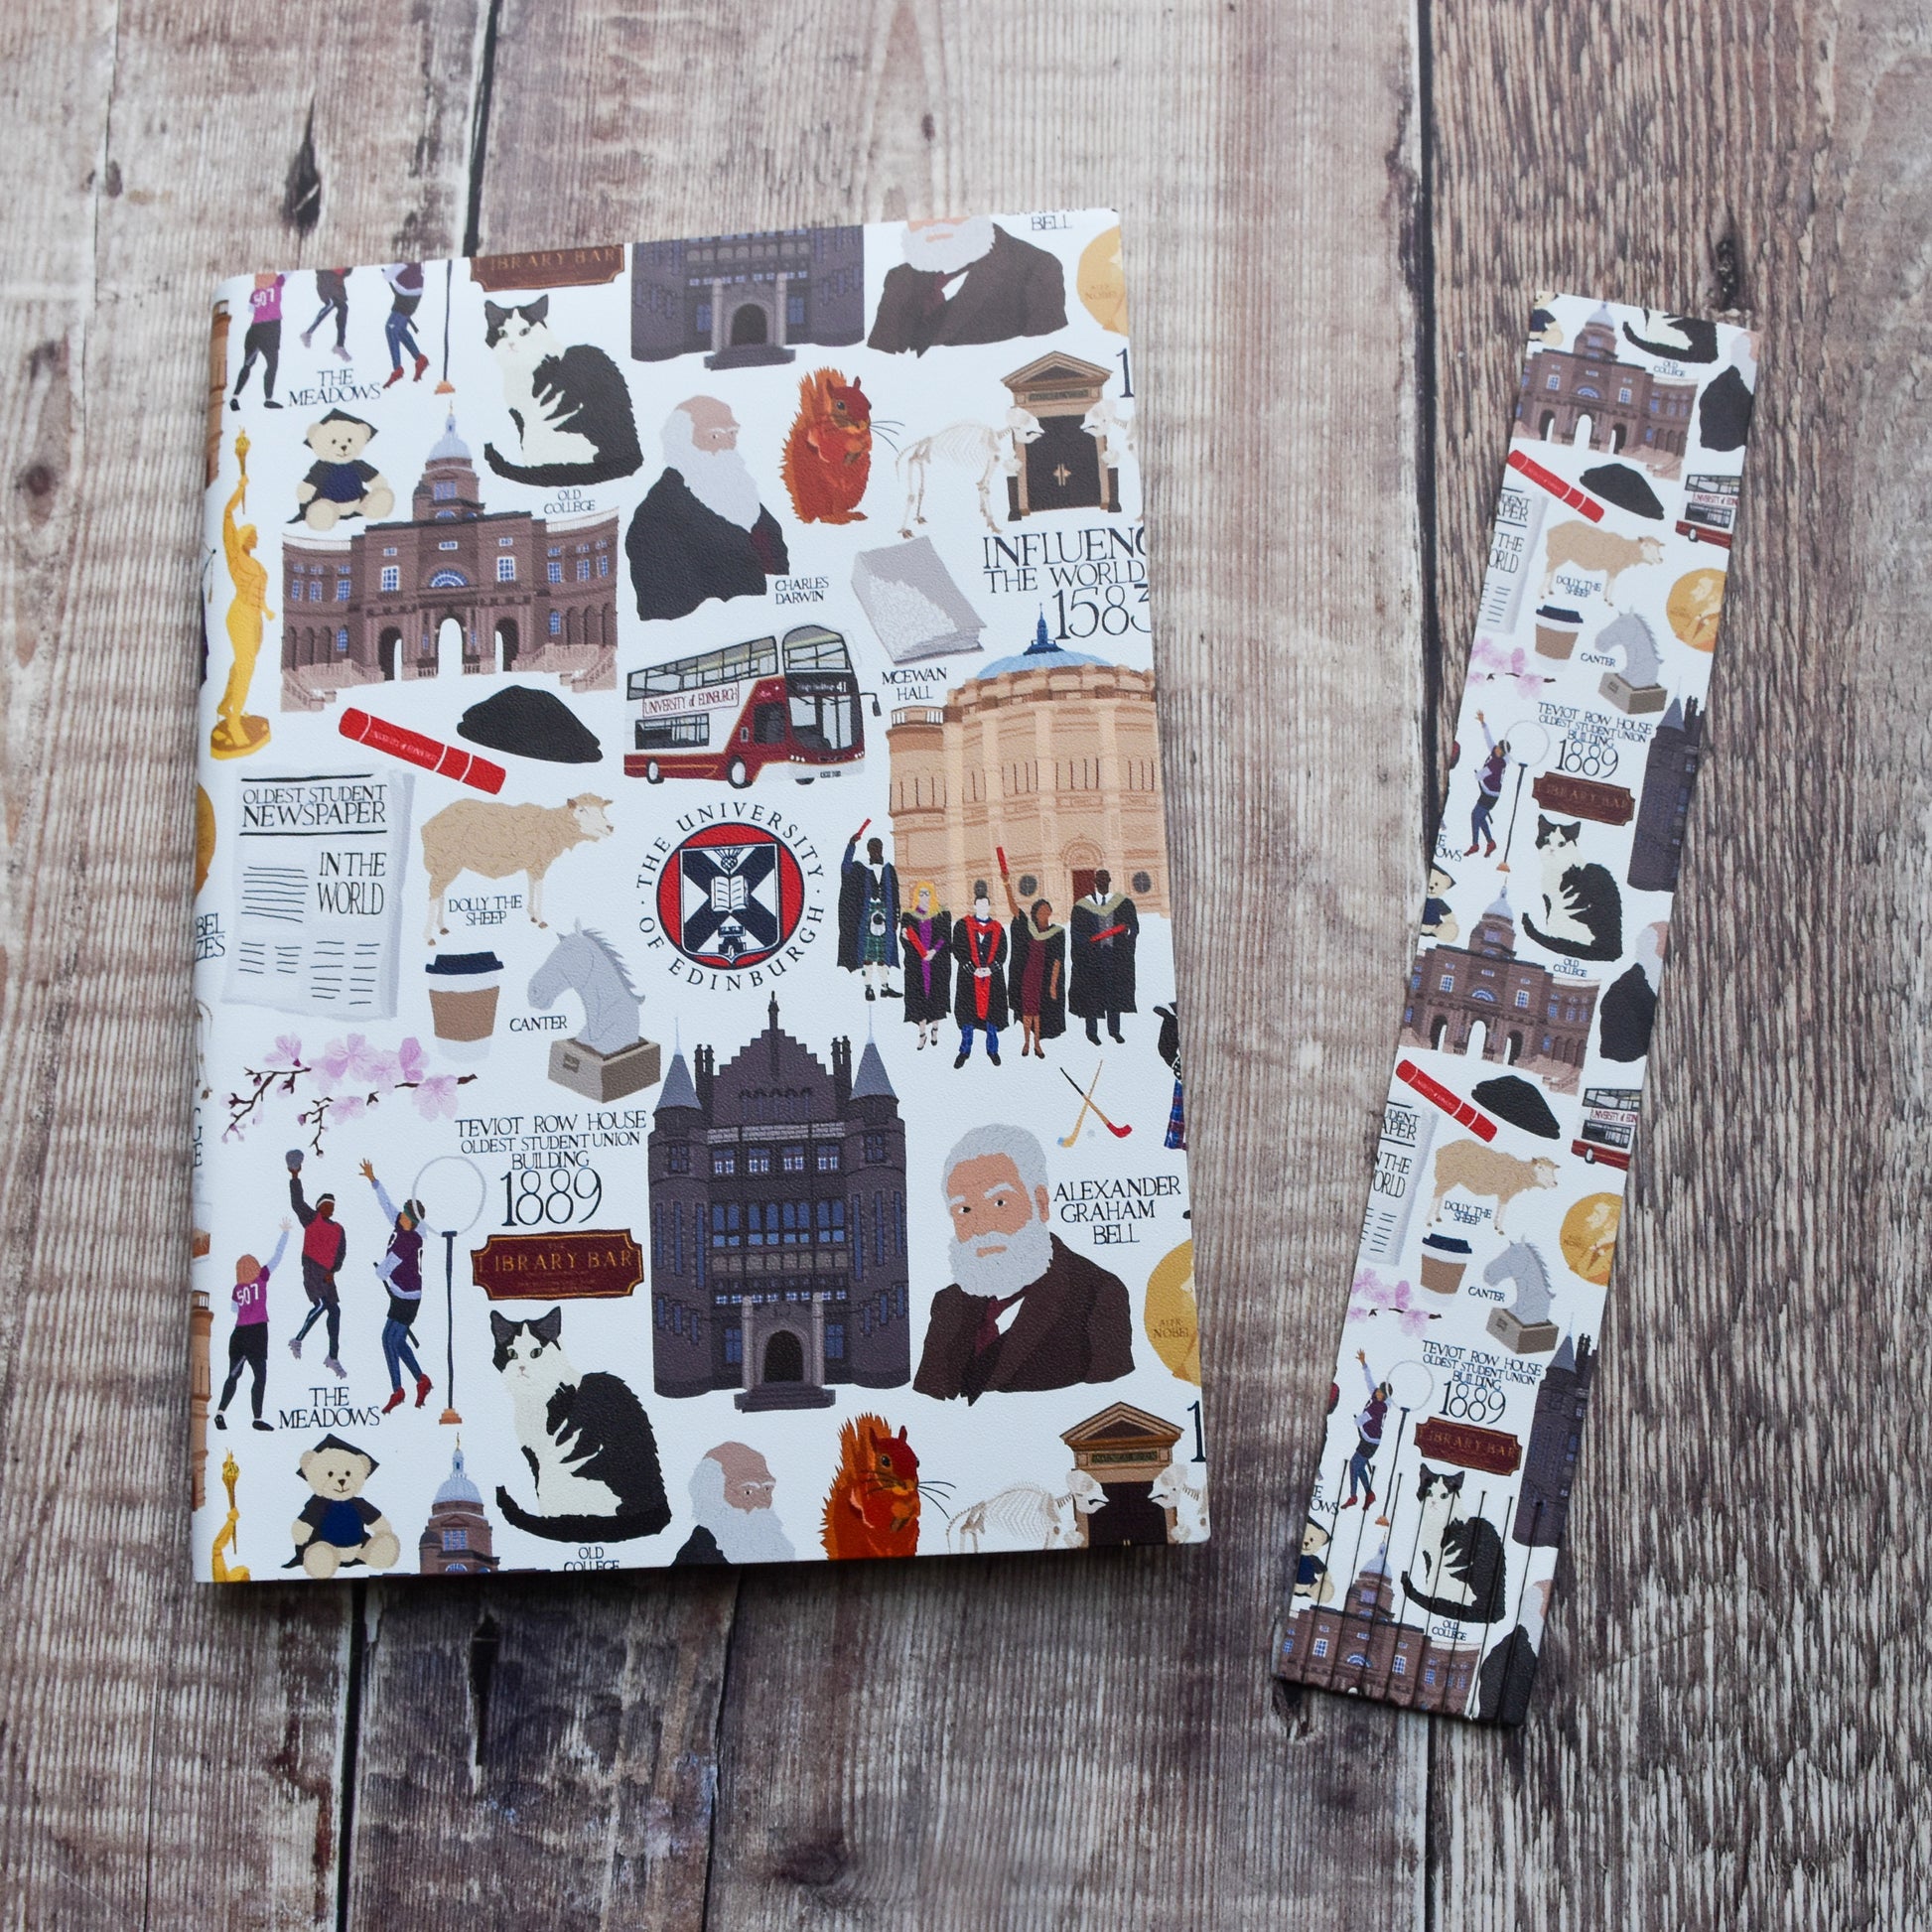 A5 Heritage Notebook next to the Heritage Collection bookmark on a wooden background.